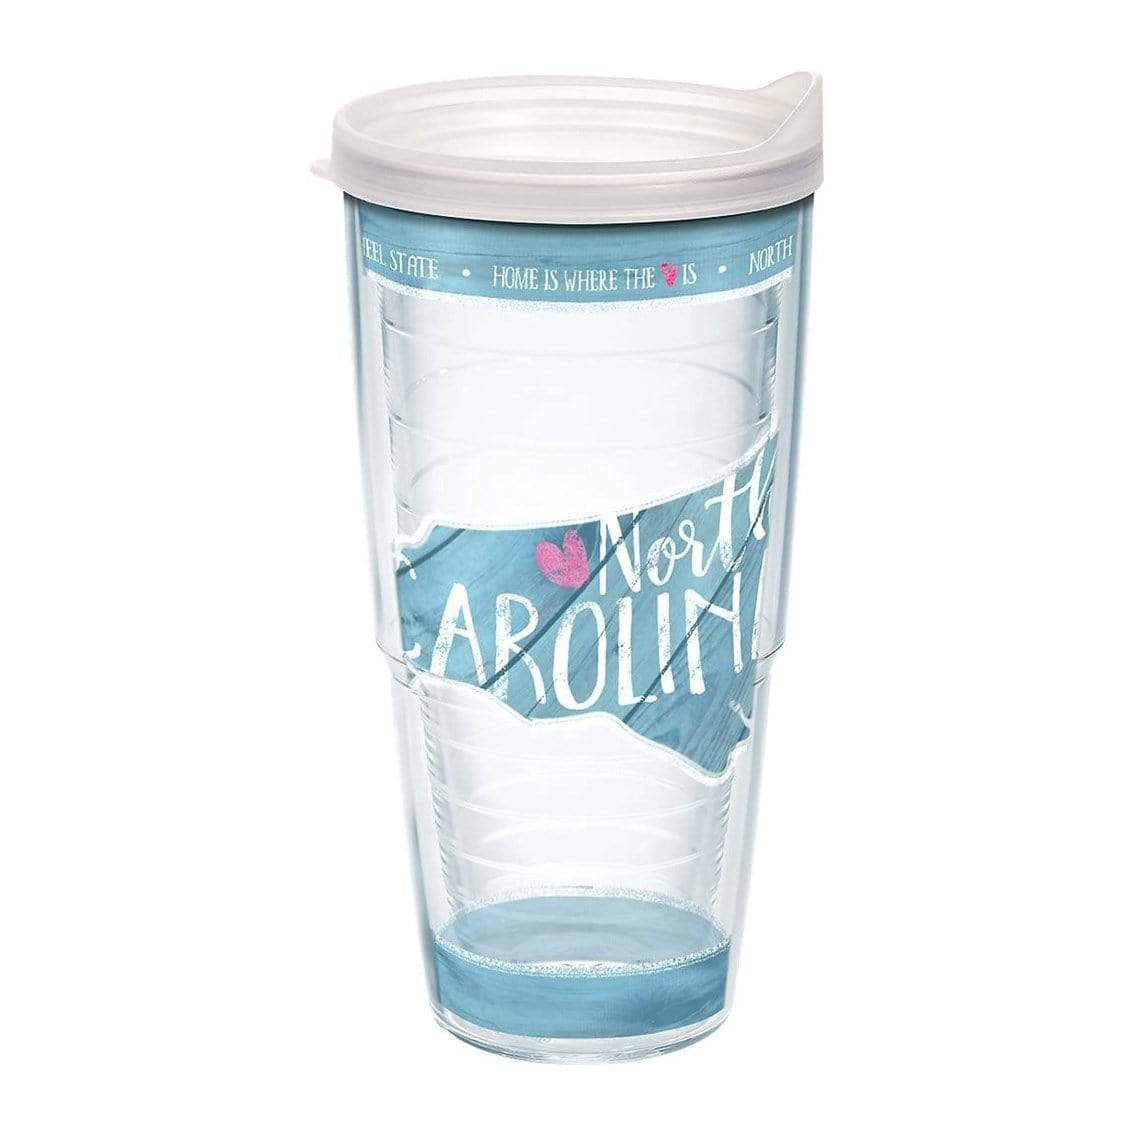 https://cdn.shopify.com/s/files/1/0472/3146/7683/products/tervis-tumbler-24-oz-north-carolina-state-outline-wrap-tumbler-with-lid-30638264451235_1600x.jpg?v=1623681952